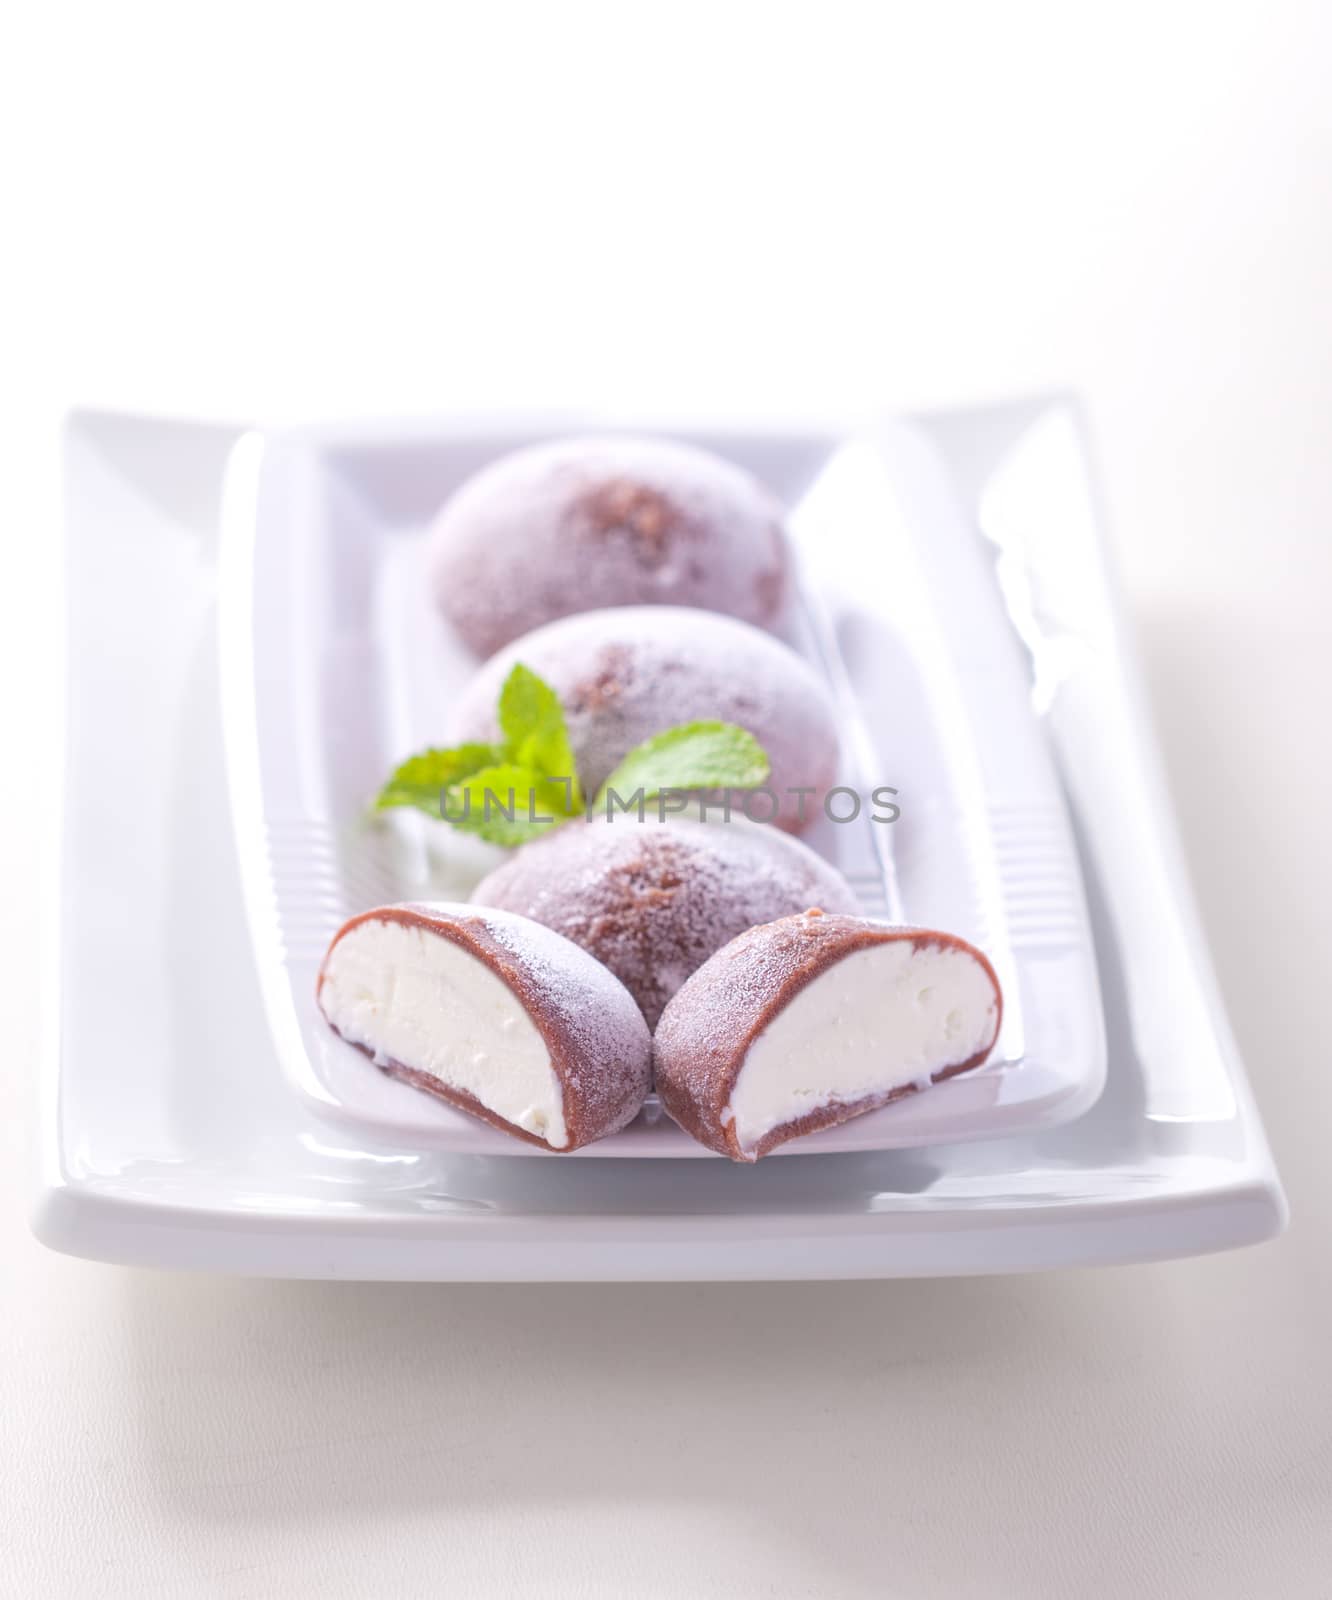 The colorful mochi dessert ice cream on wood plate.